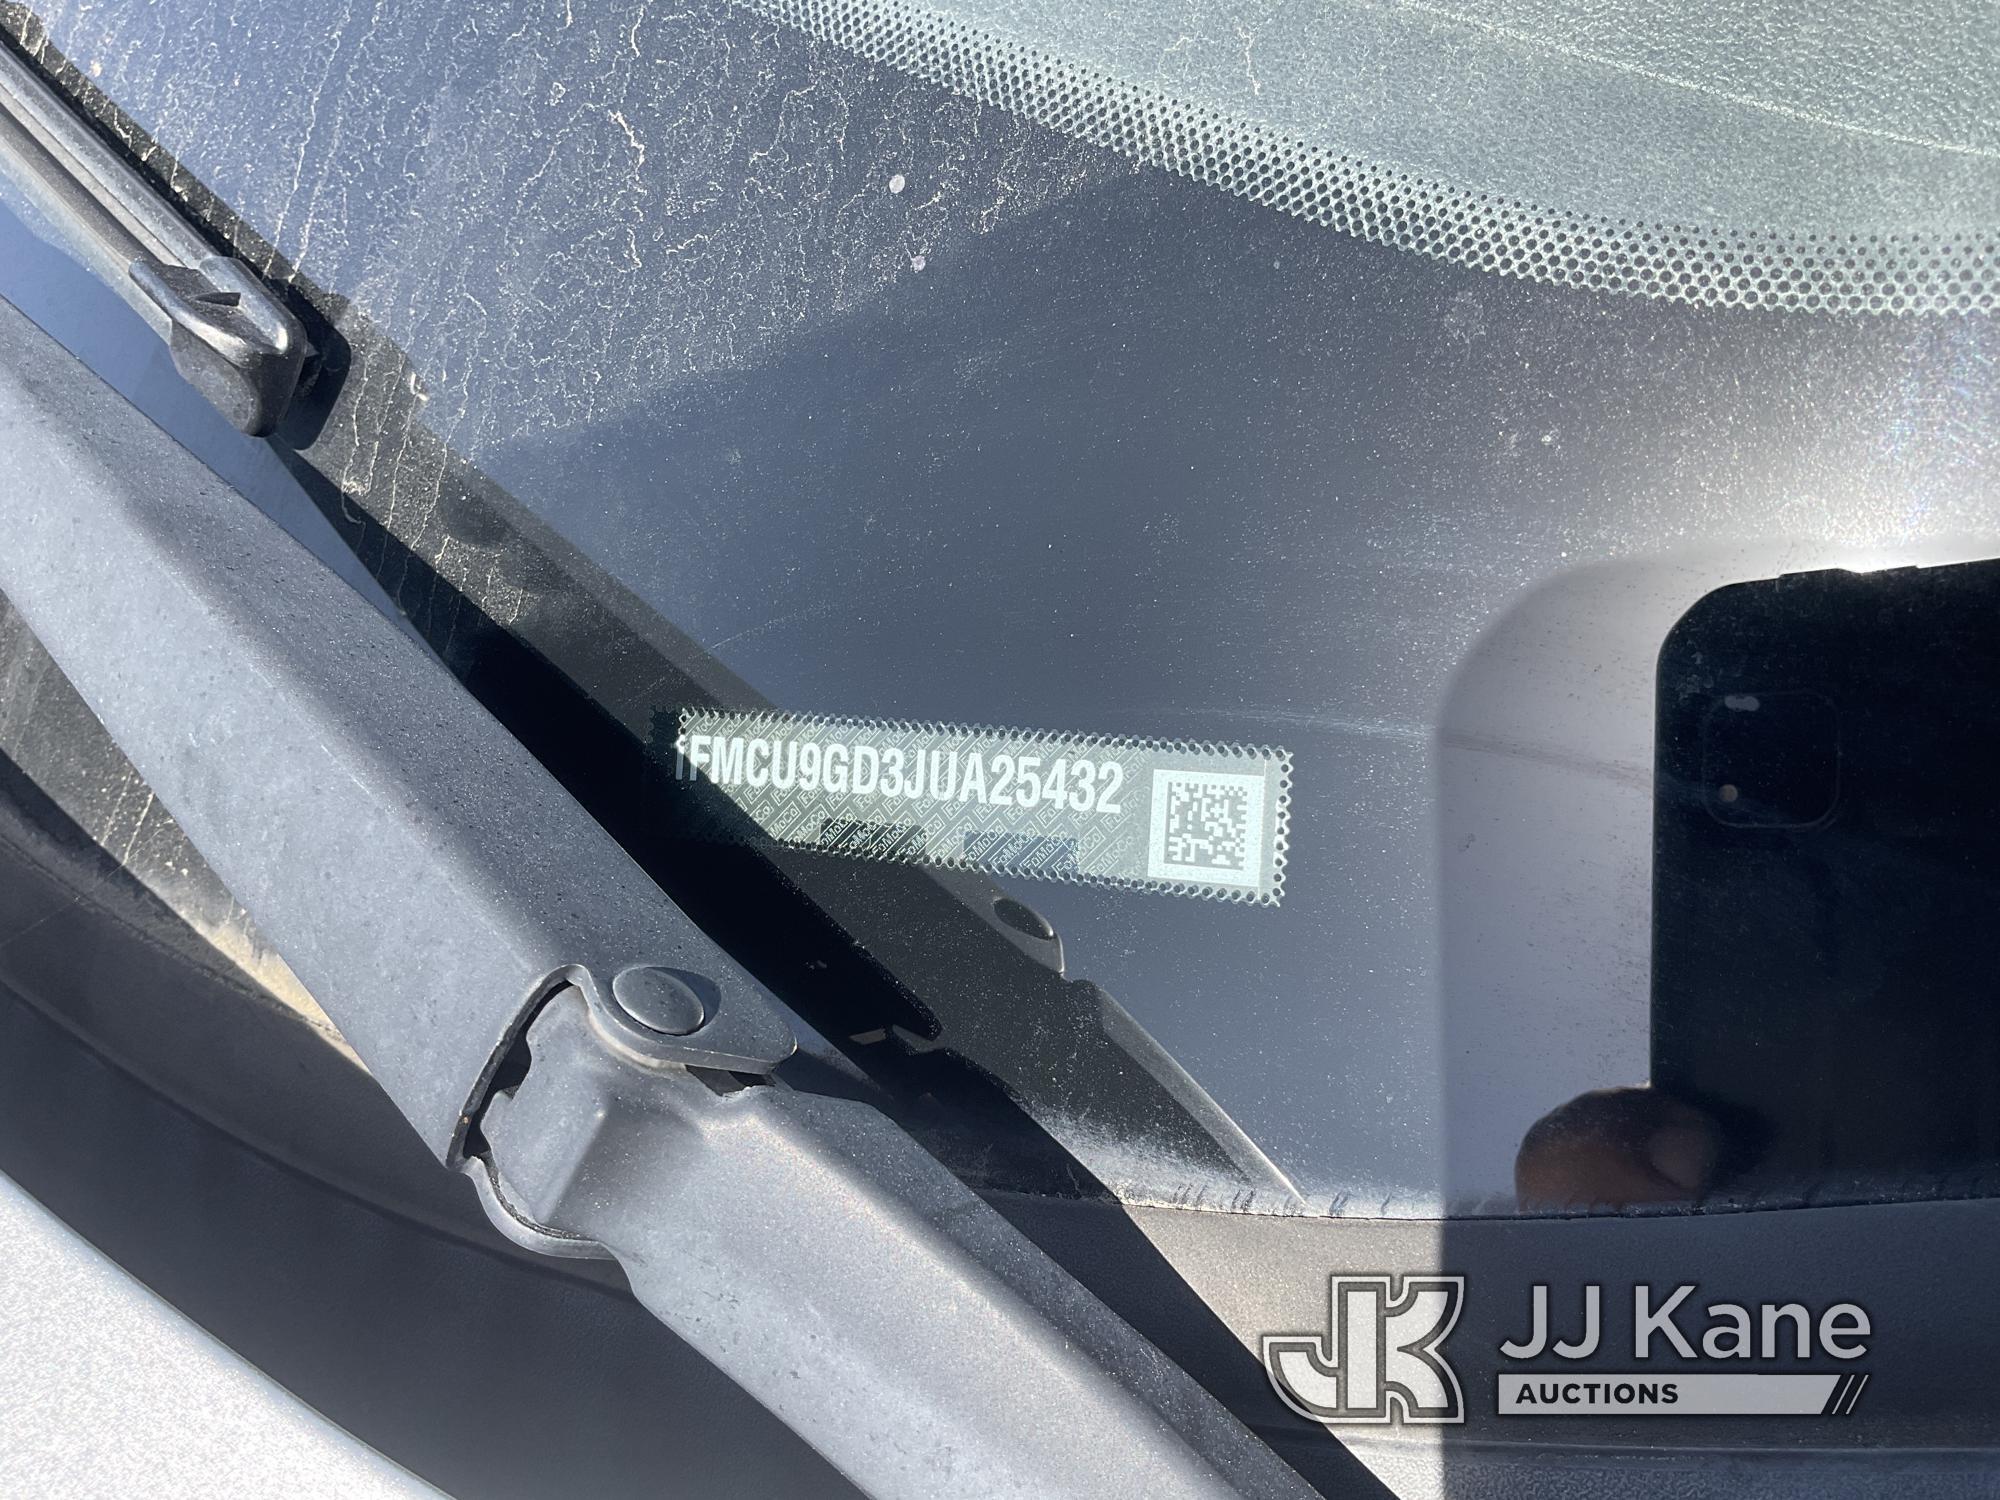 (Jurupa Valley, CA) 2018 Ford Escape 4x4 Sport Utility Vehicle Runs, Bad Transmission, Must Be Towed